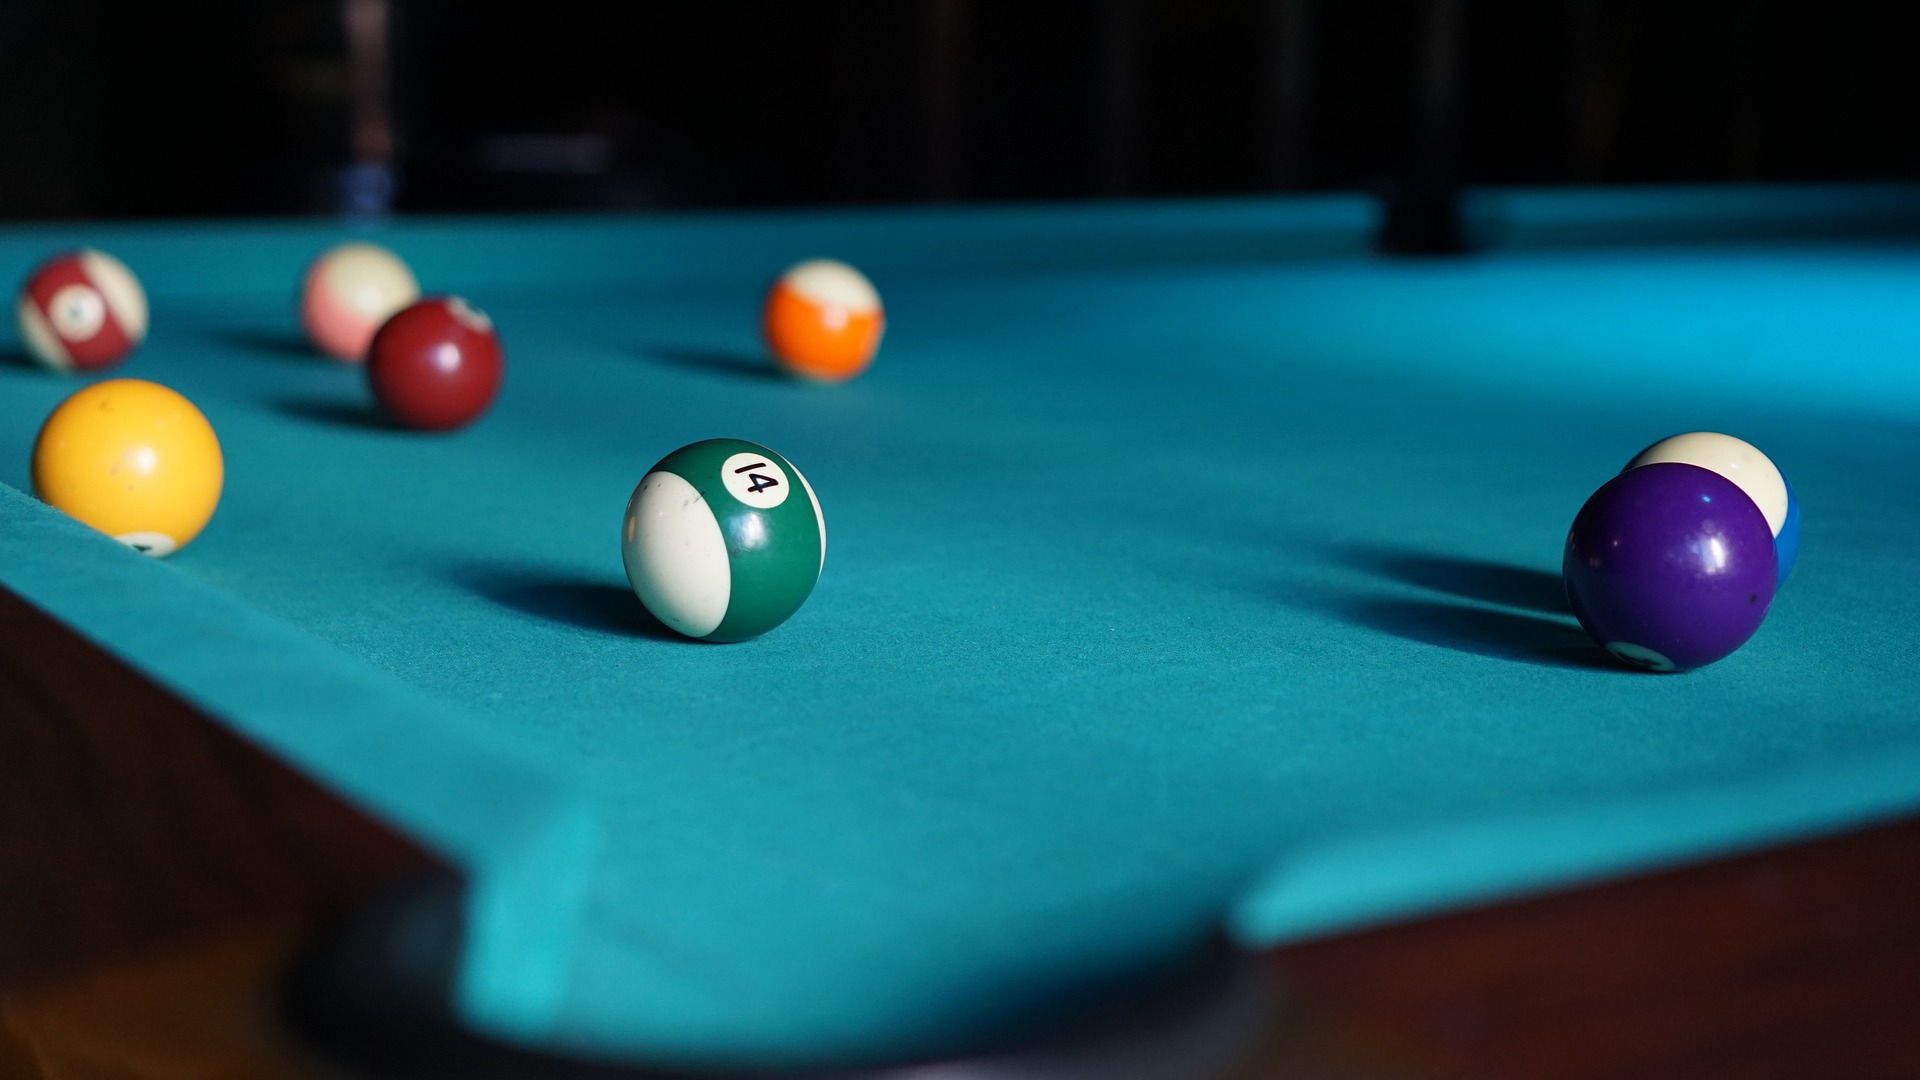 Discover who are the best billiard players